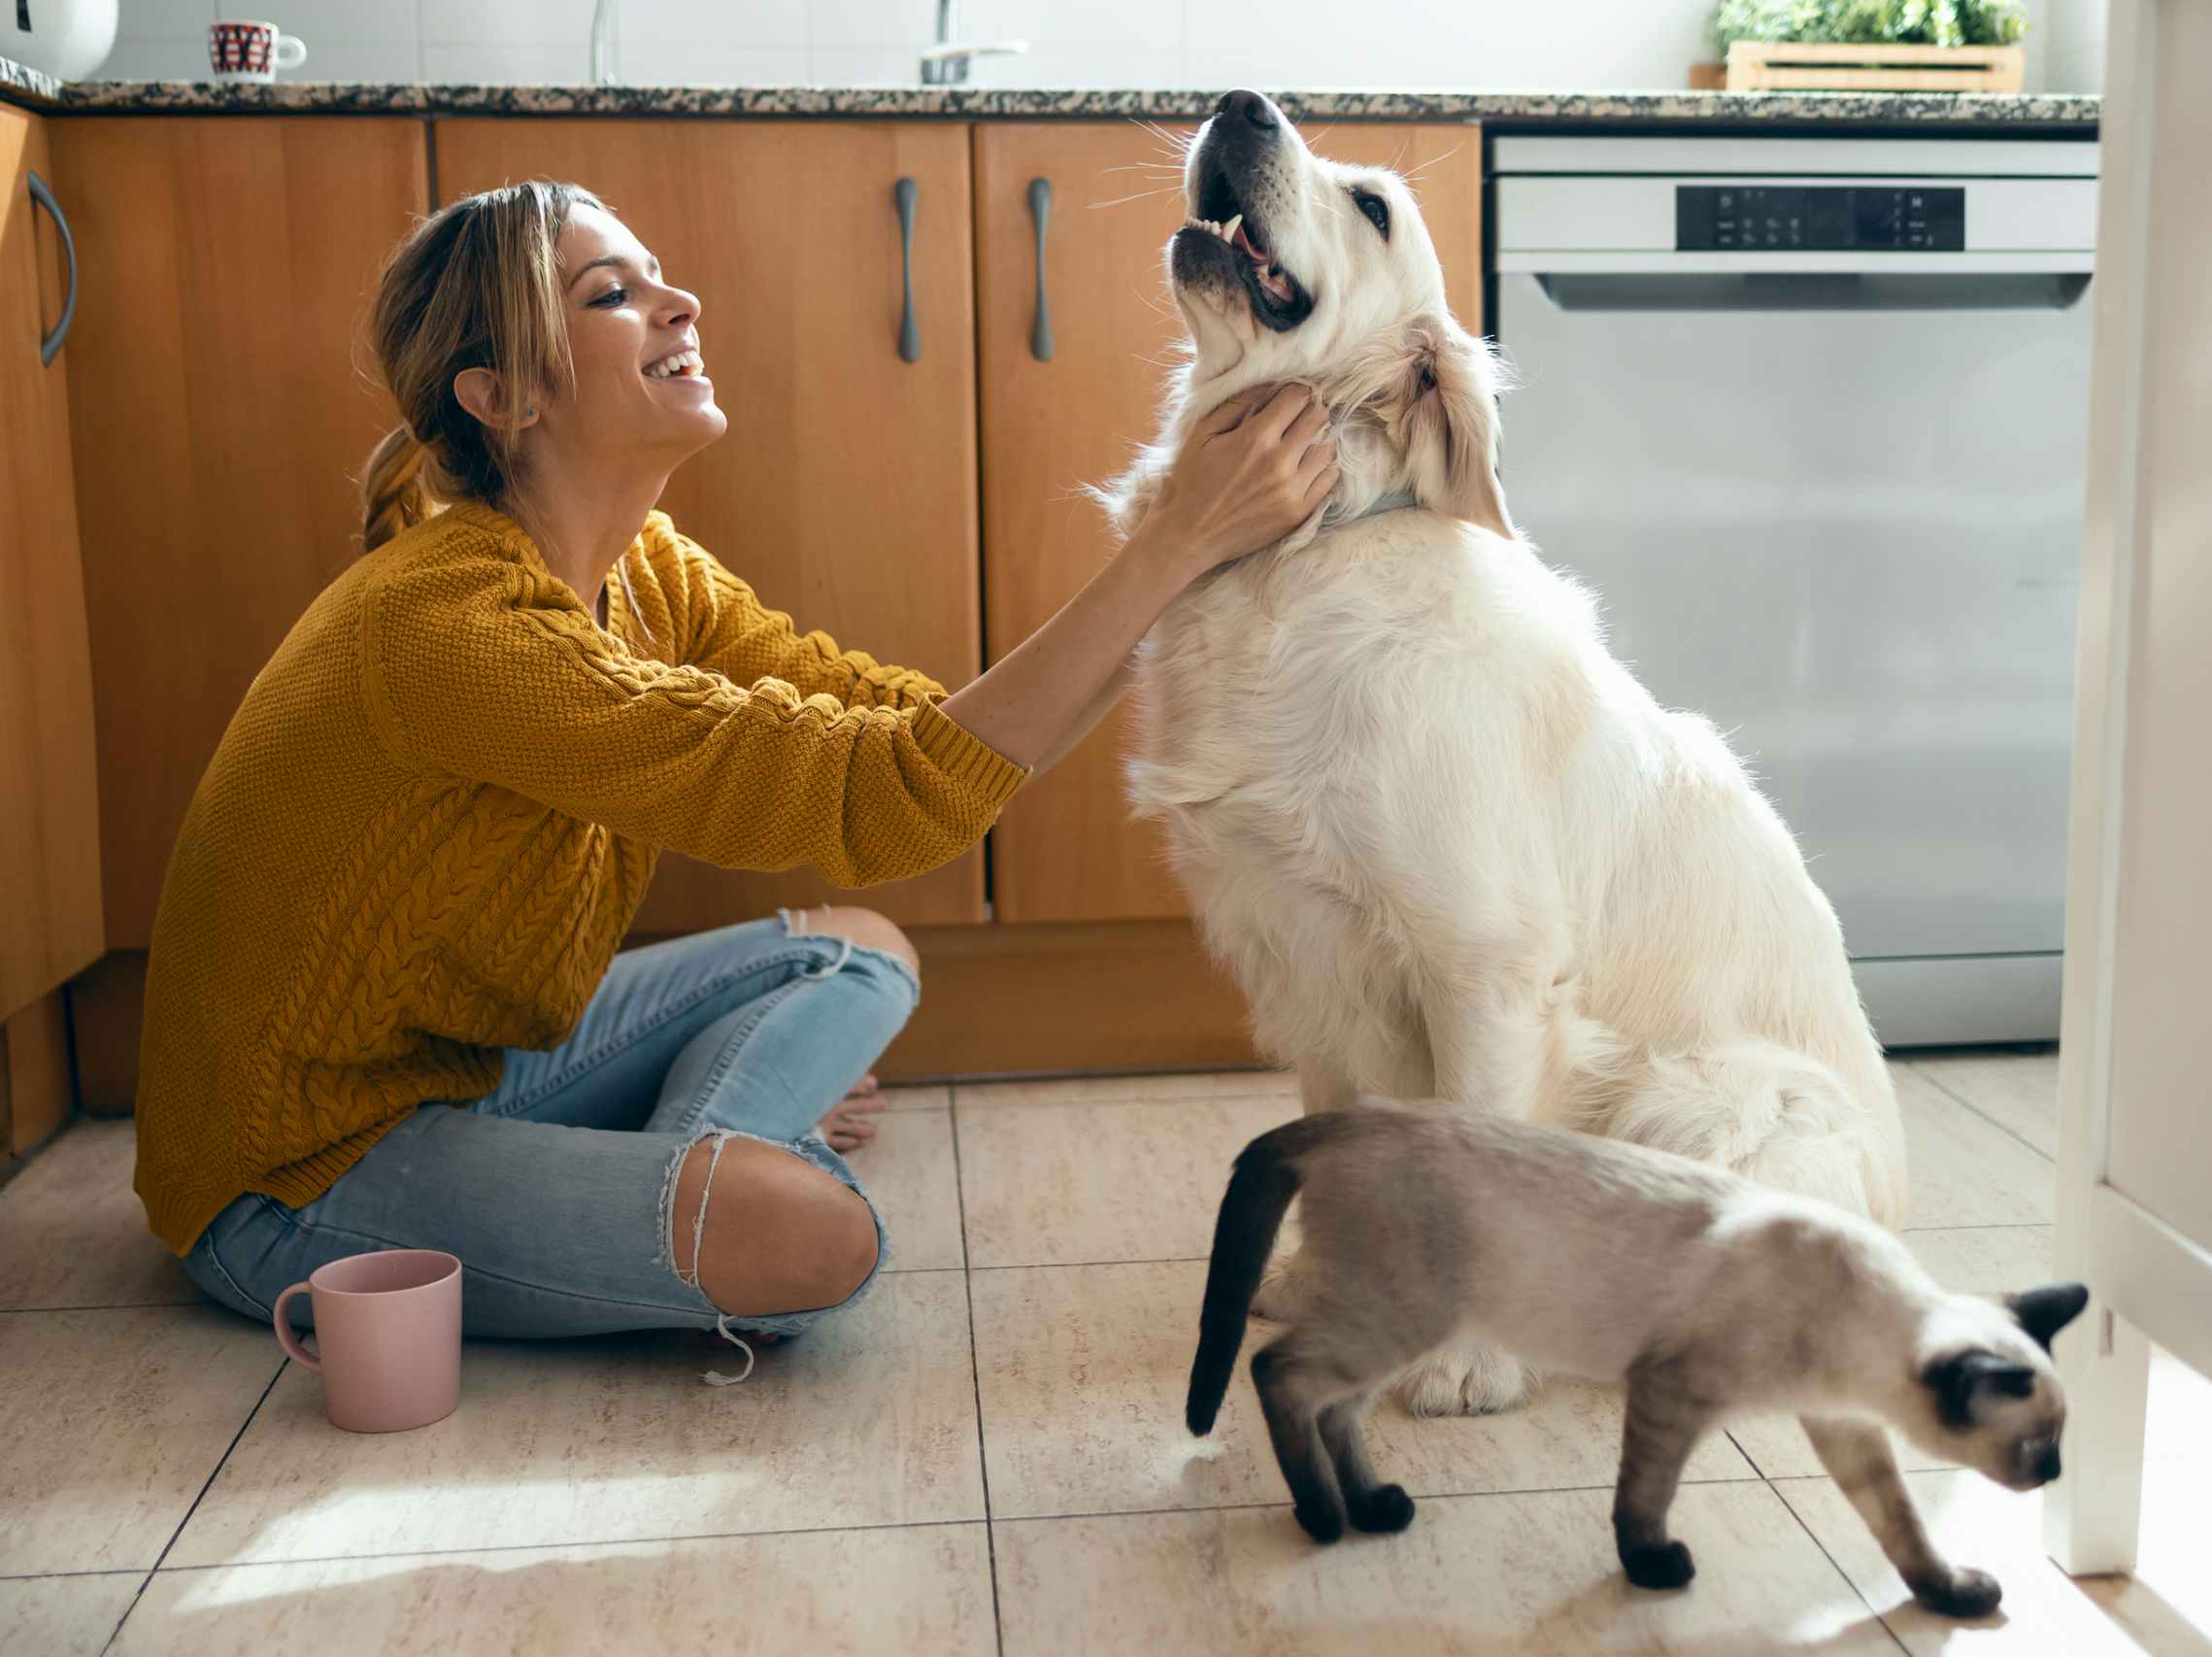 A woman sitting on a kitchen floor, petting a big dog while a cat walks by.